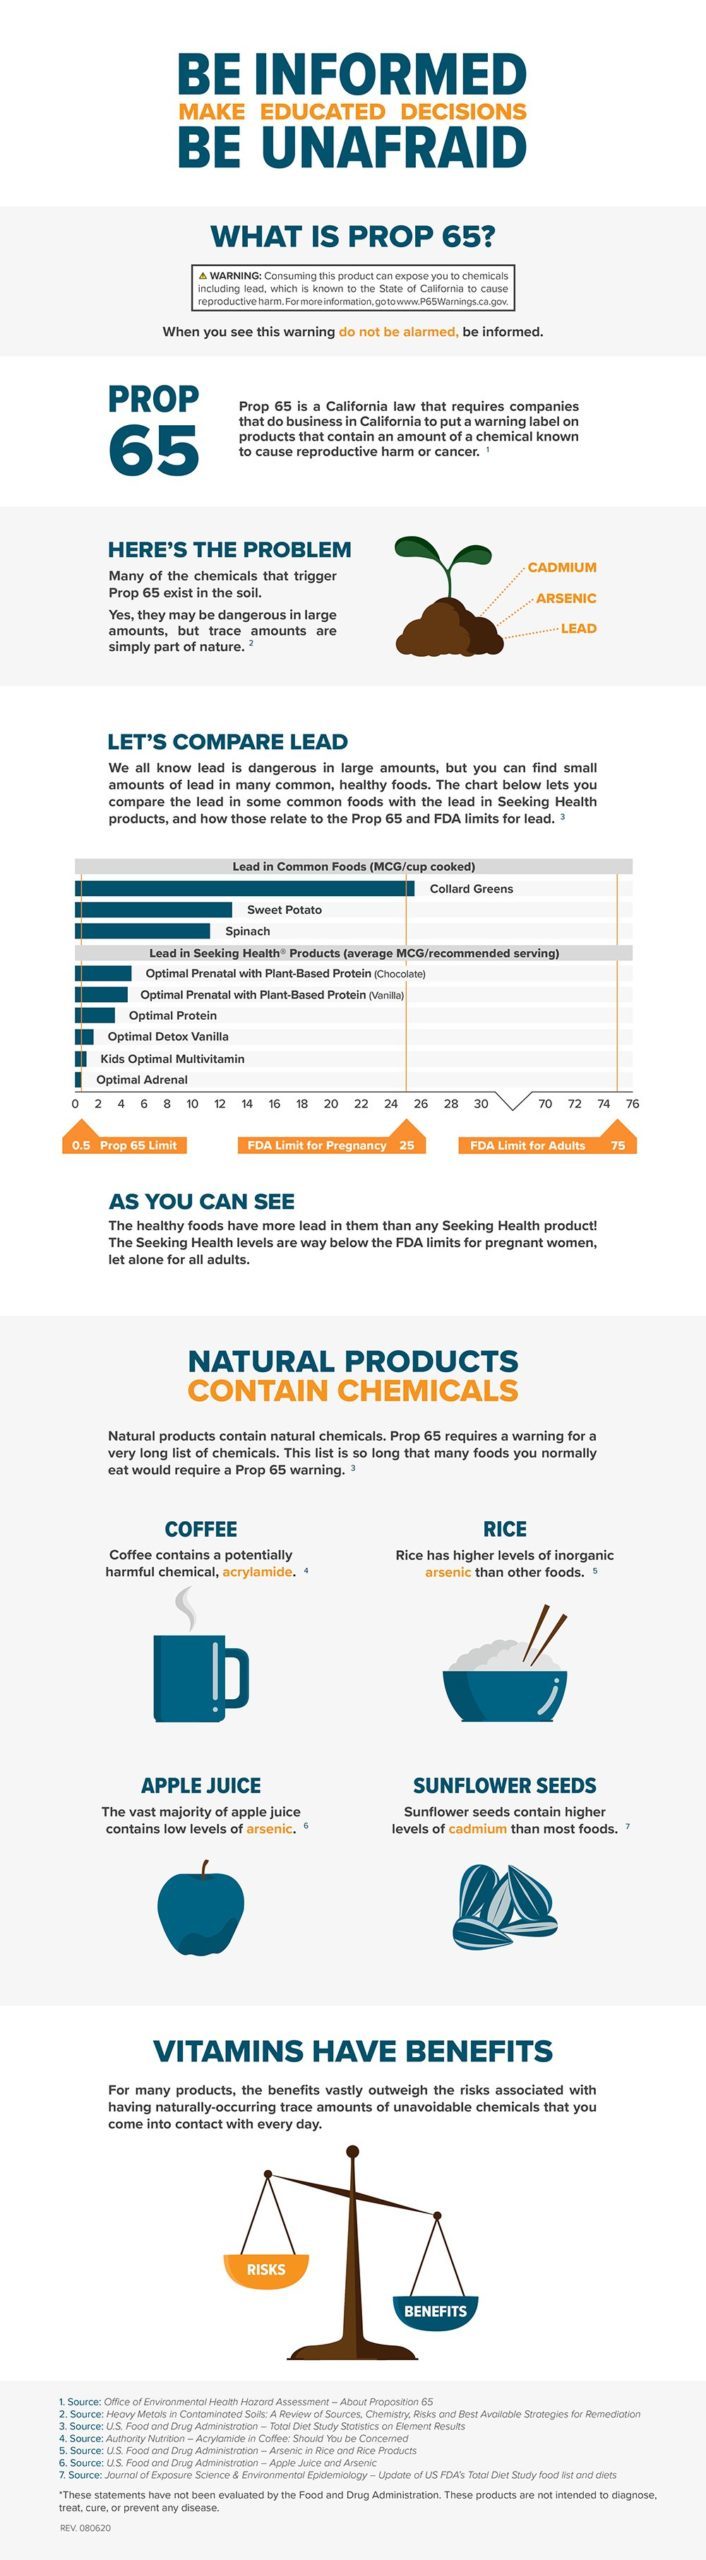 infographic-prop65-blog-rev080620-1/>
<h2><strong>Why Don’t All Supplements Have Prop 65 Warnings?</strong></h2>
<p>There are many reasons why most supplements don’t have Prop 65 warnings on their product labels. Here are the primary reasons that some of ours do:</p>

<strong>1. Active Nutrients At Effective Doses</strong>

<p>Here at <a href=